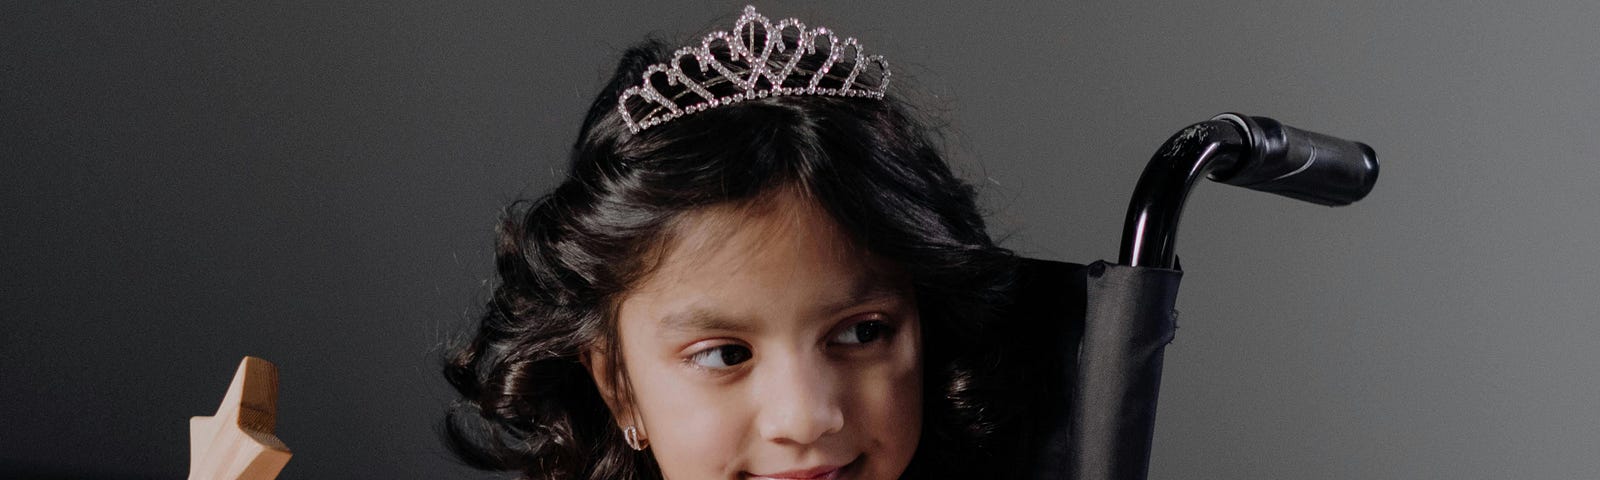 Young girl in a tiara and wand sits in her chair with a Mona Lisa smile as she looks at something off-camera.